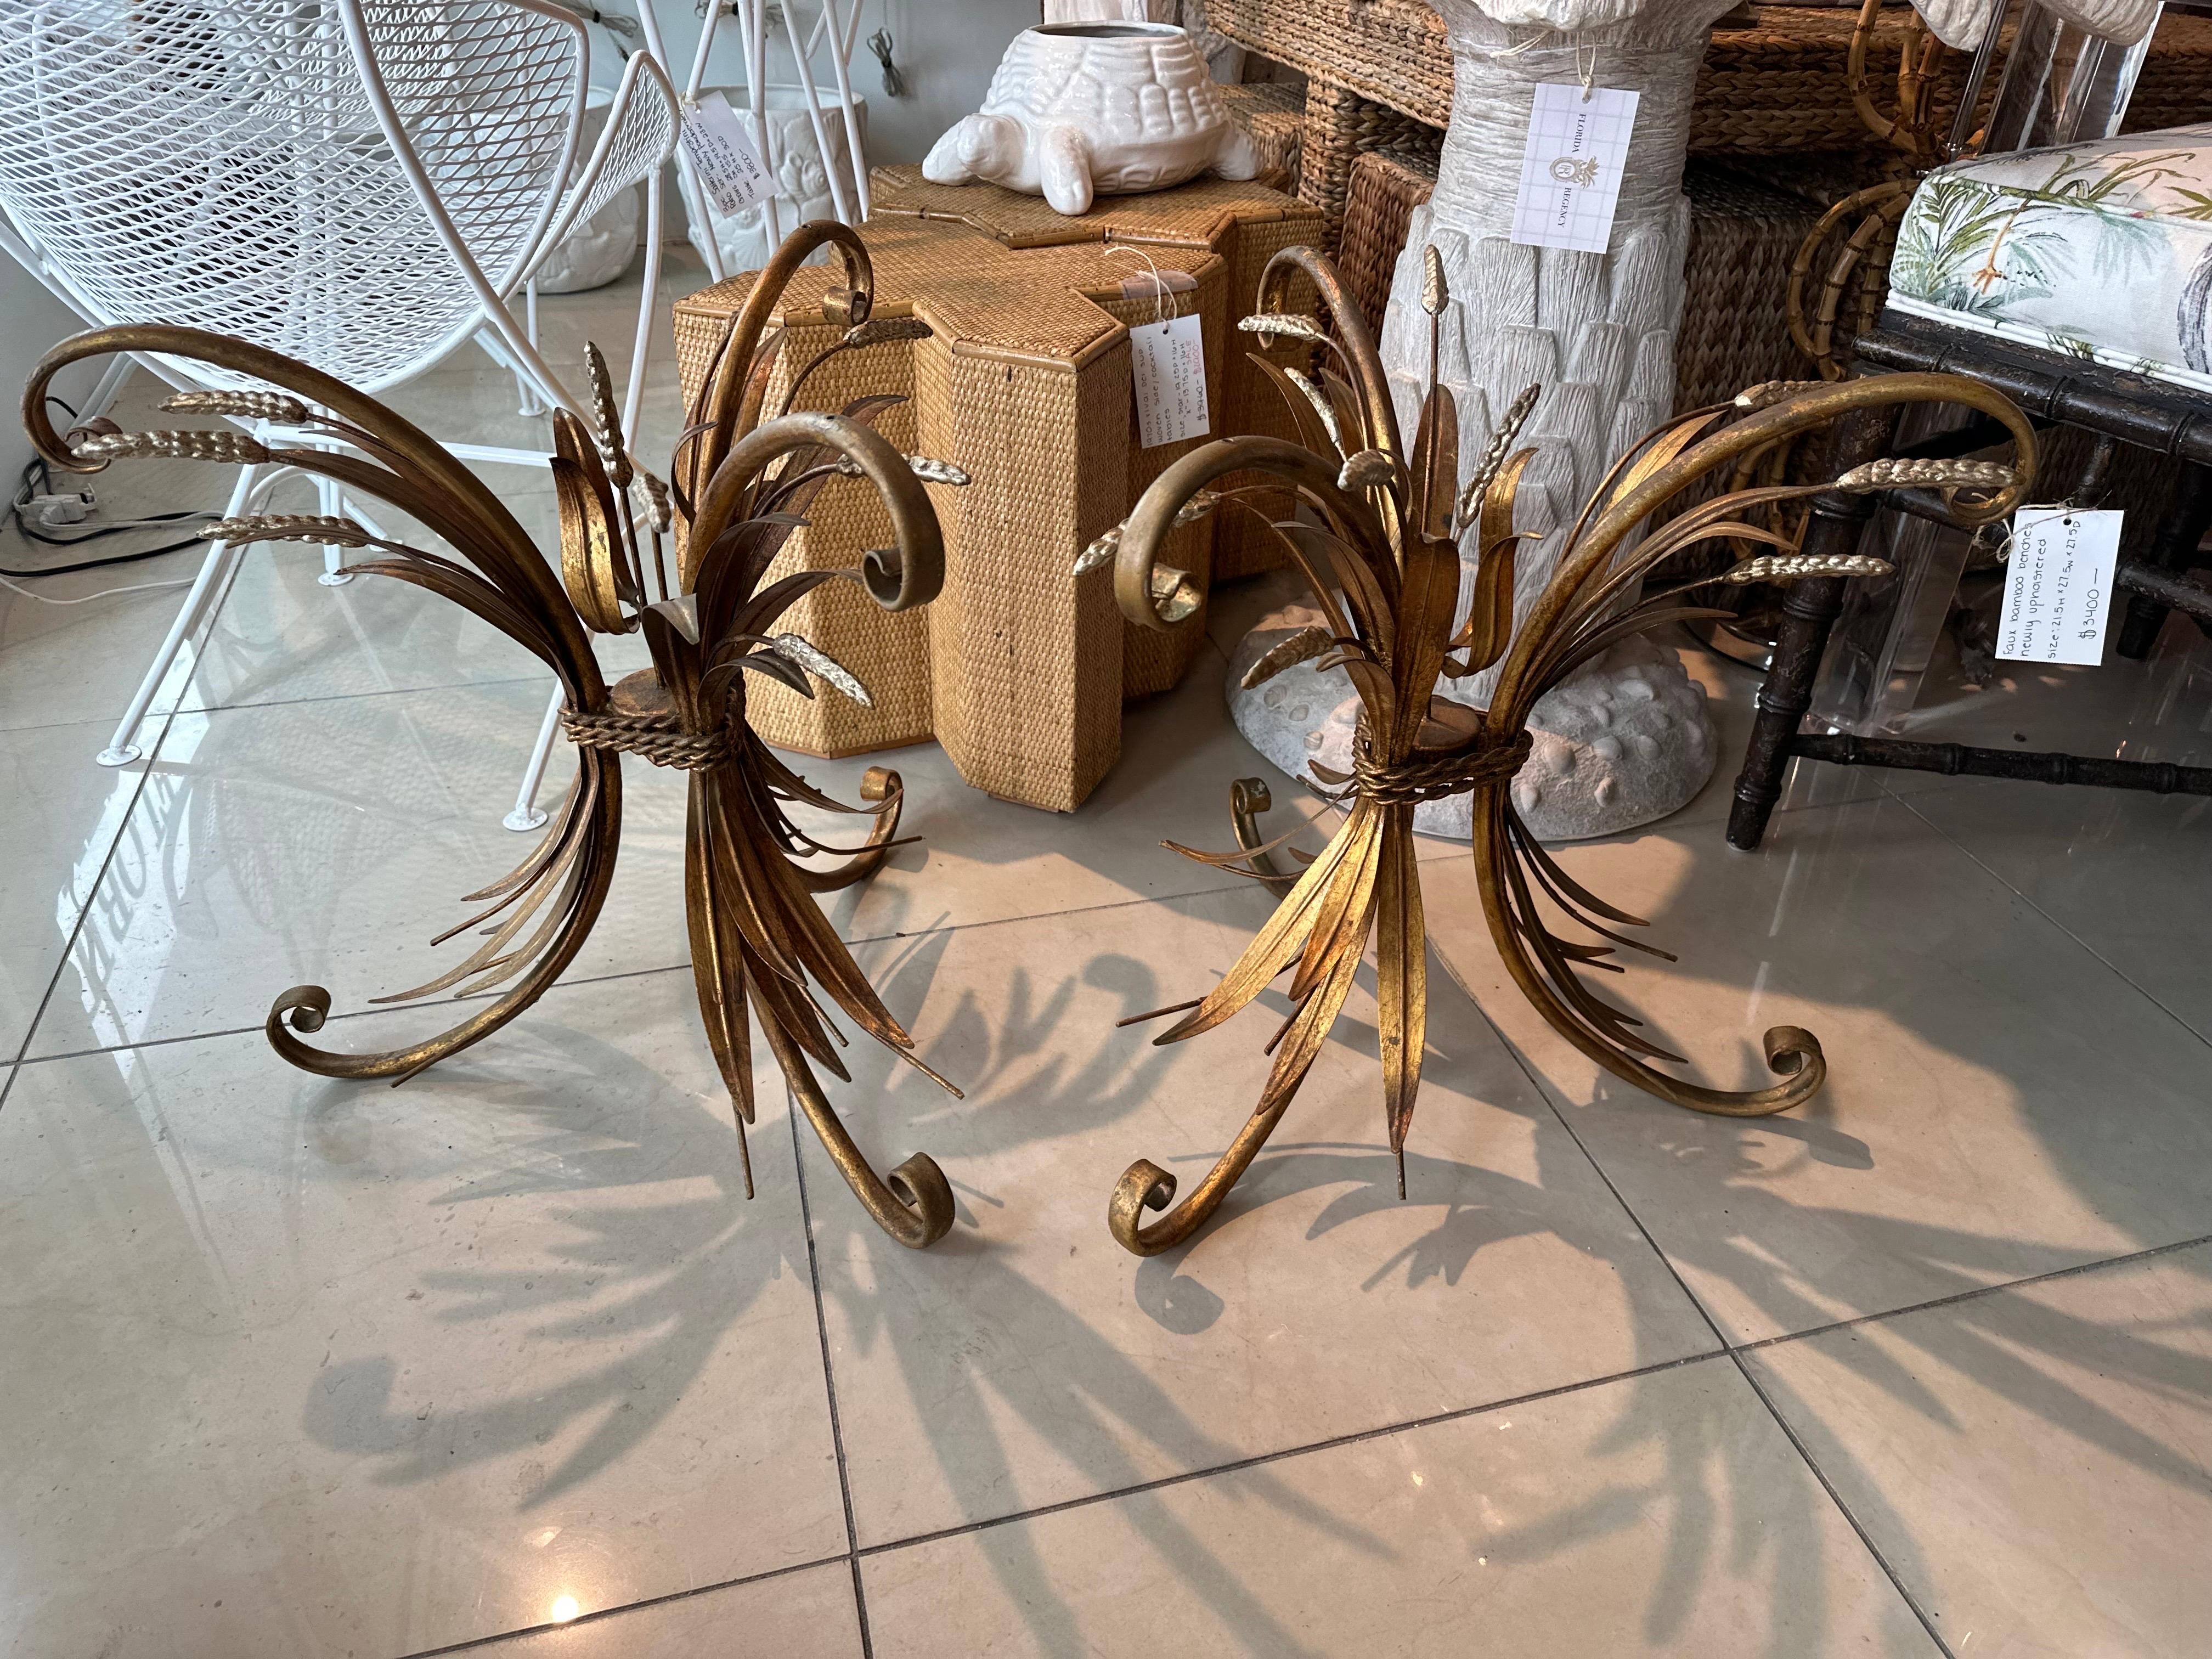 Lovely pair of vintage Italian metal tole gold gilt side, end or coffee tables. Can be used as either. Original patina. Does not include glass top. Dimensions: 20 H x 20 D. 